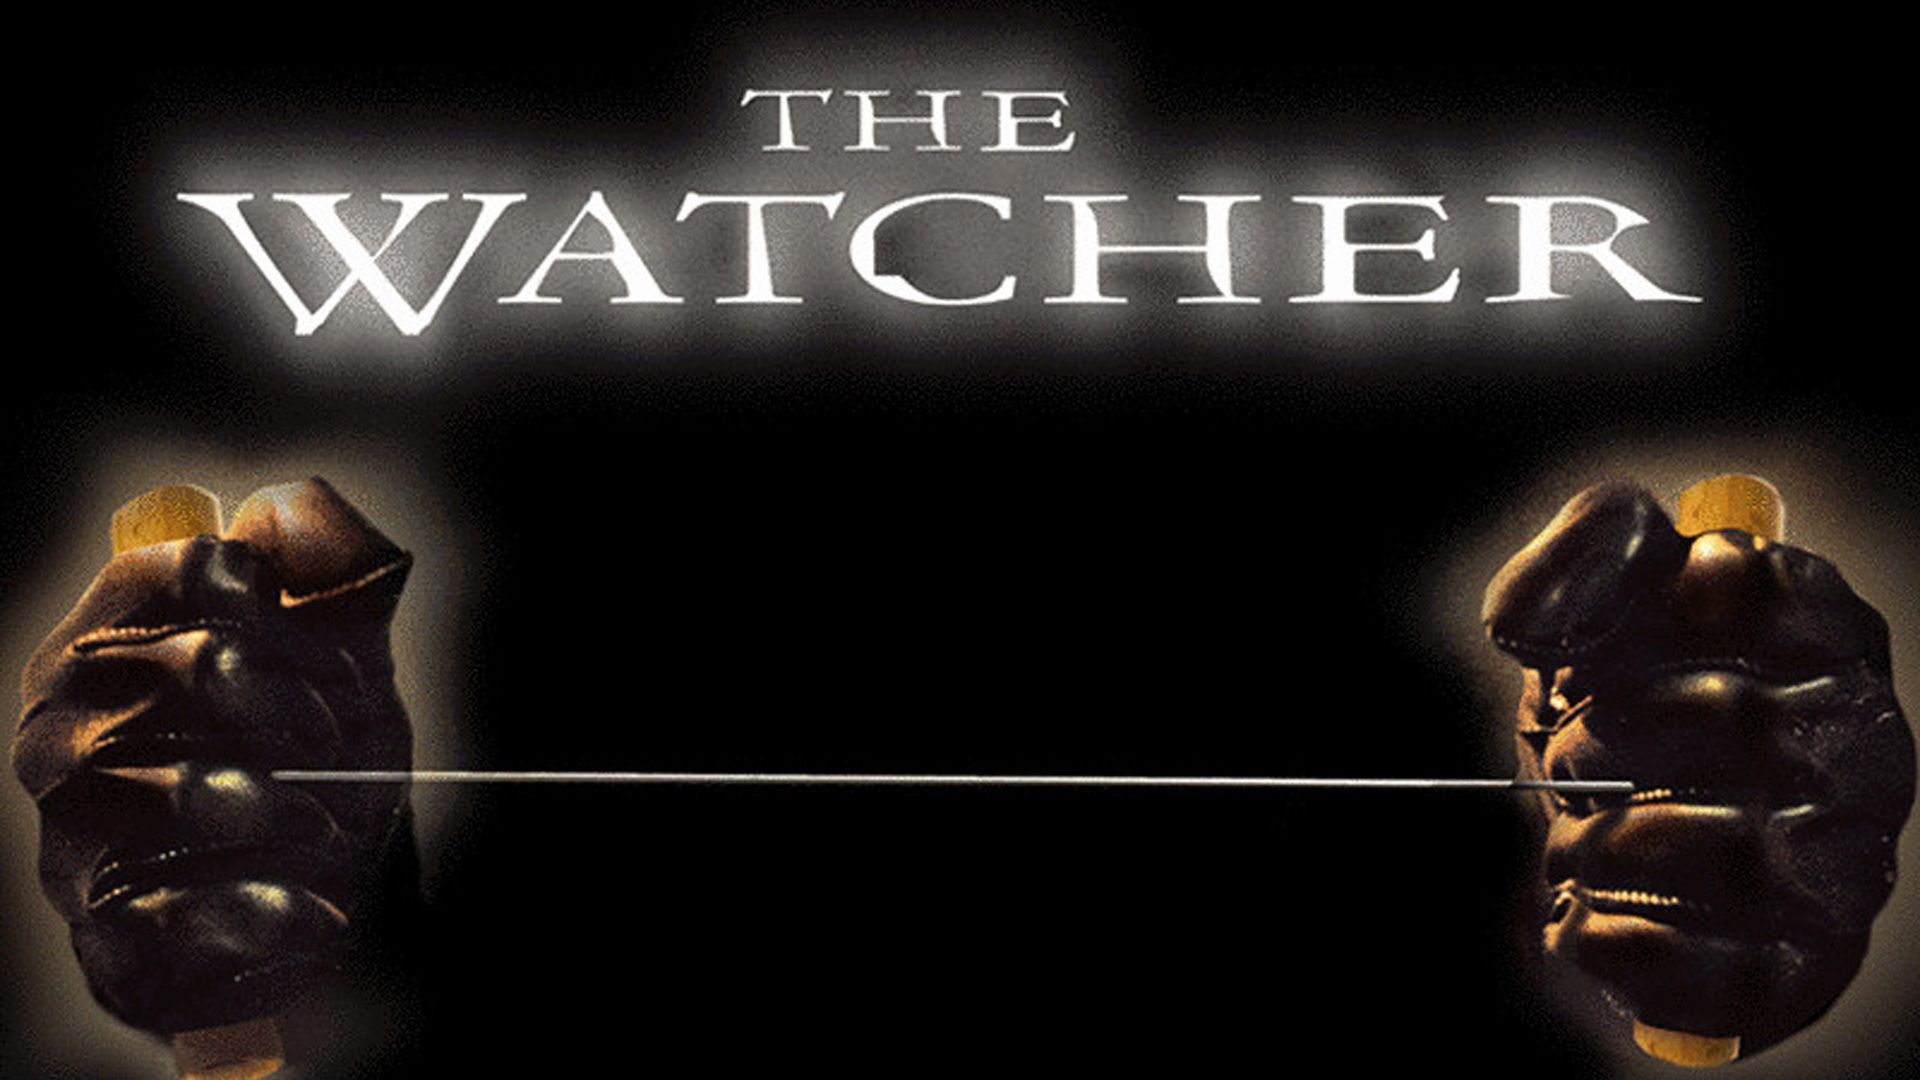 The Watcher Backdrop